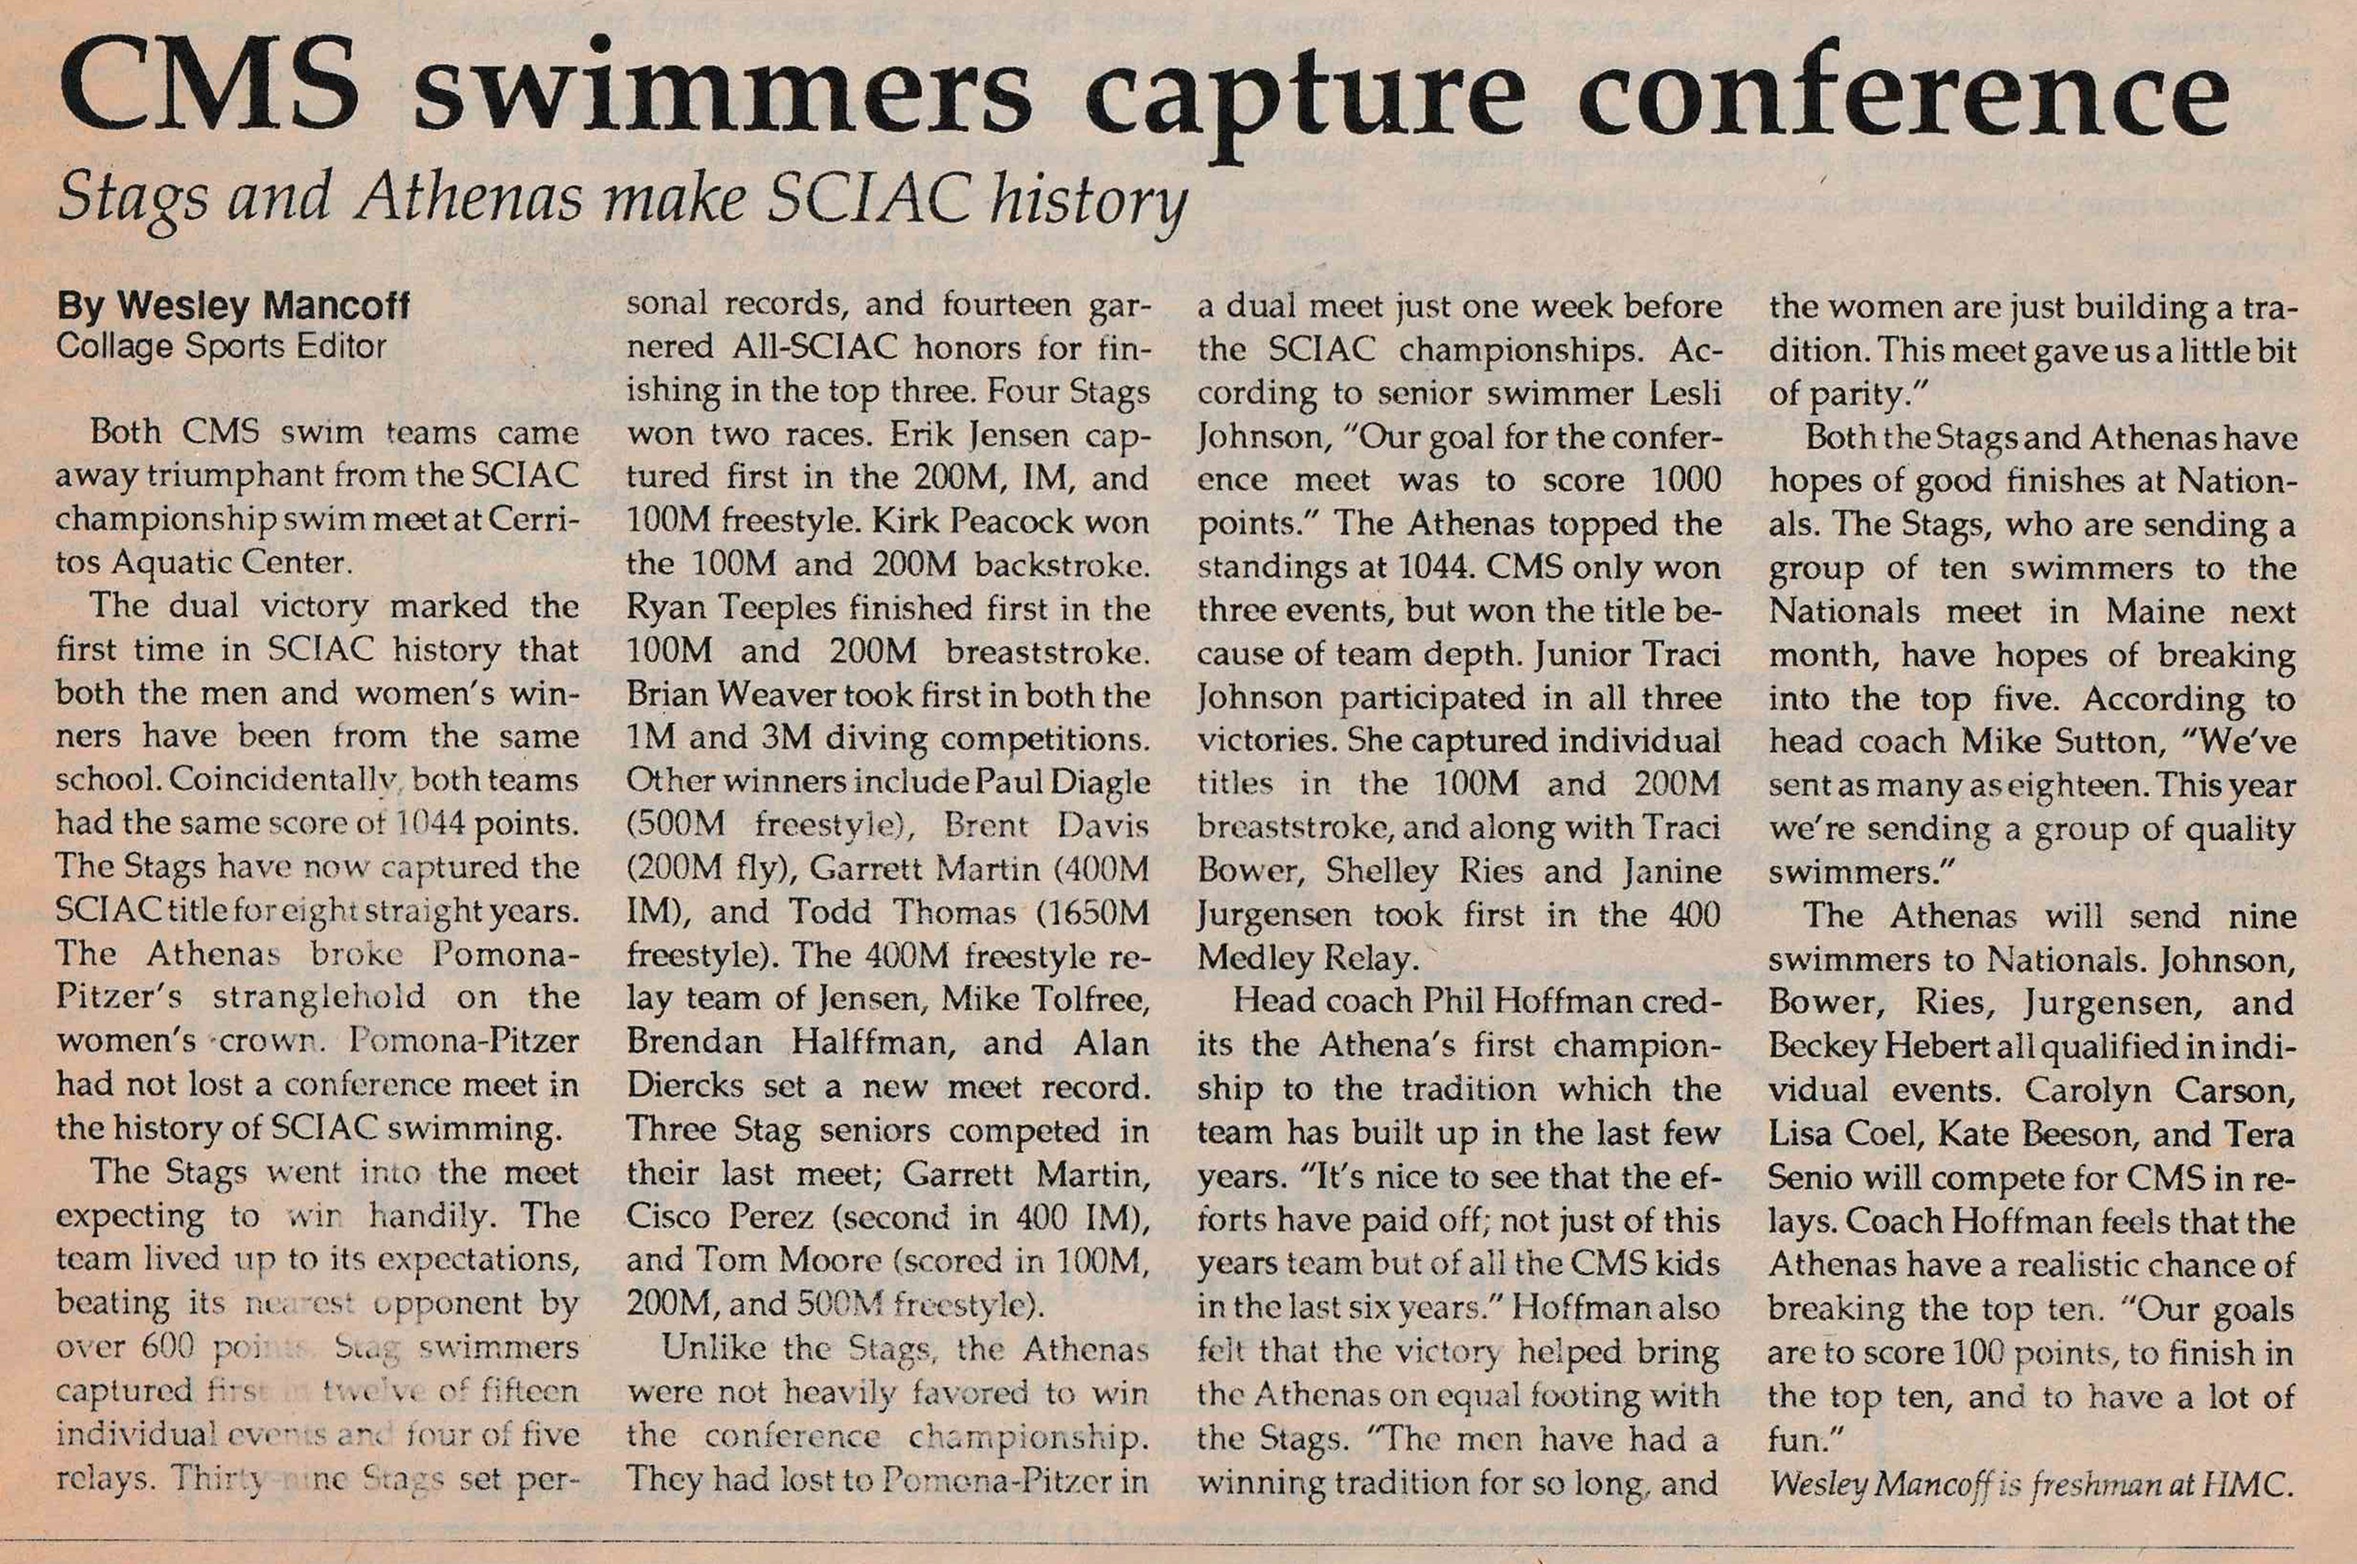 Newspaper clipping with headline "CMS Swimmers Capture Conference"